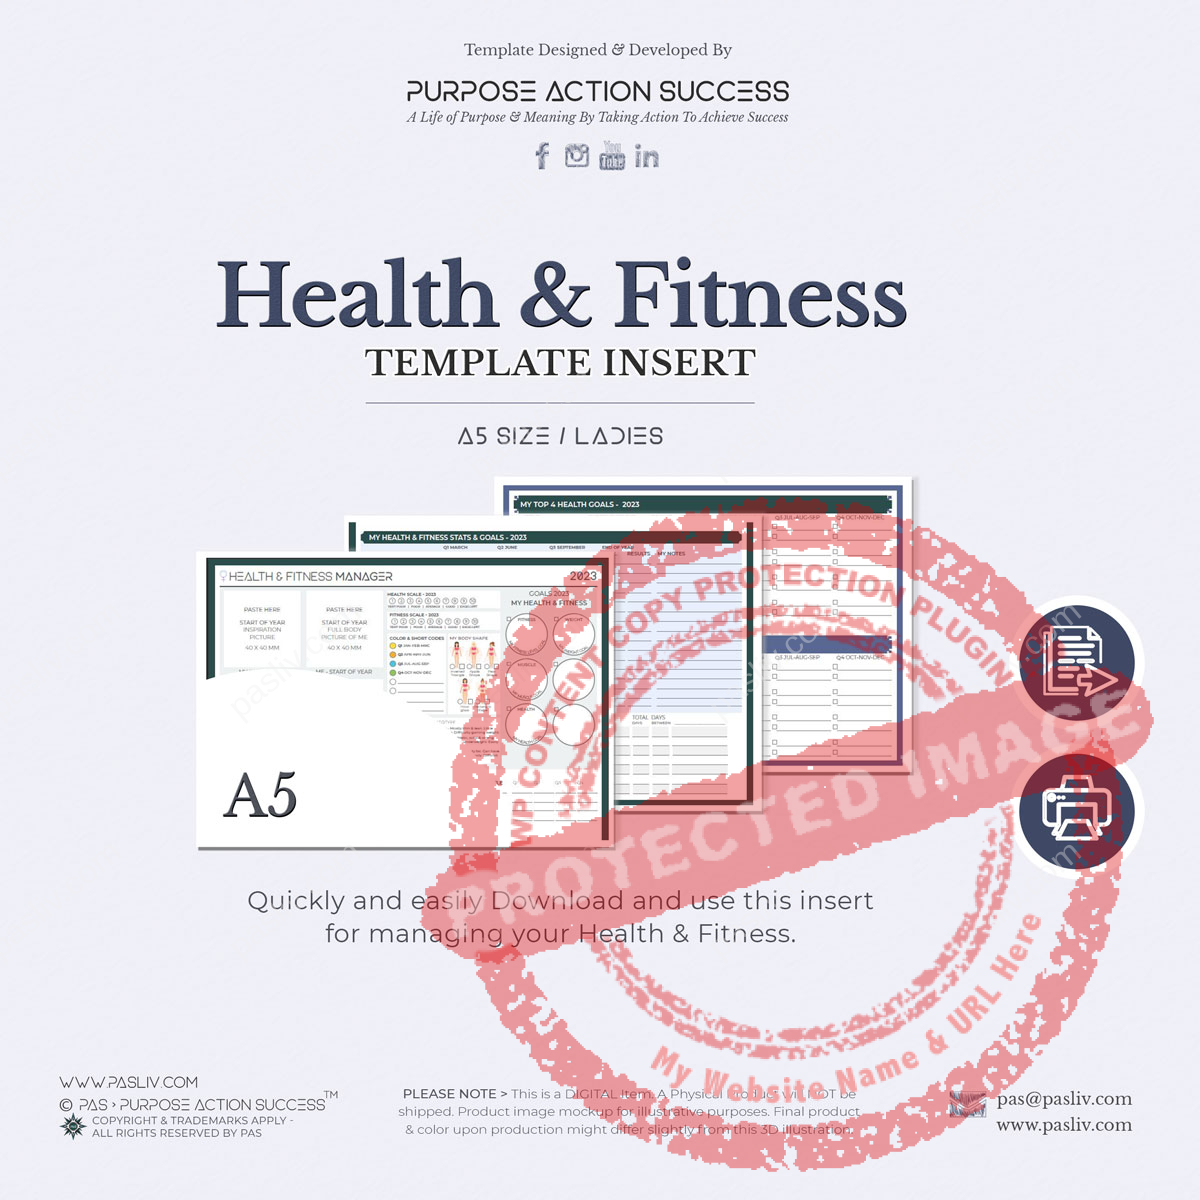 A5 PAS Health & Fitness Template for LADY - Copyright & Trademarks By PAS > Purpose Action Success - All Rights Reserved